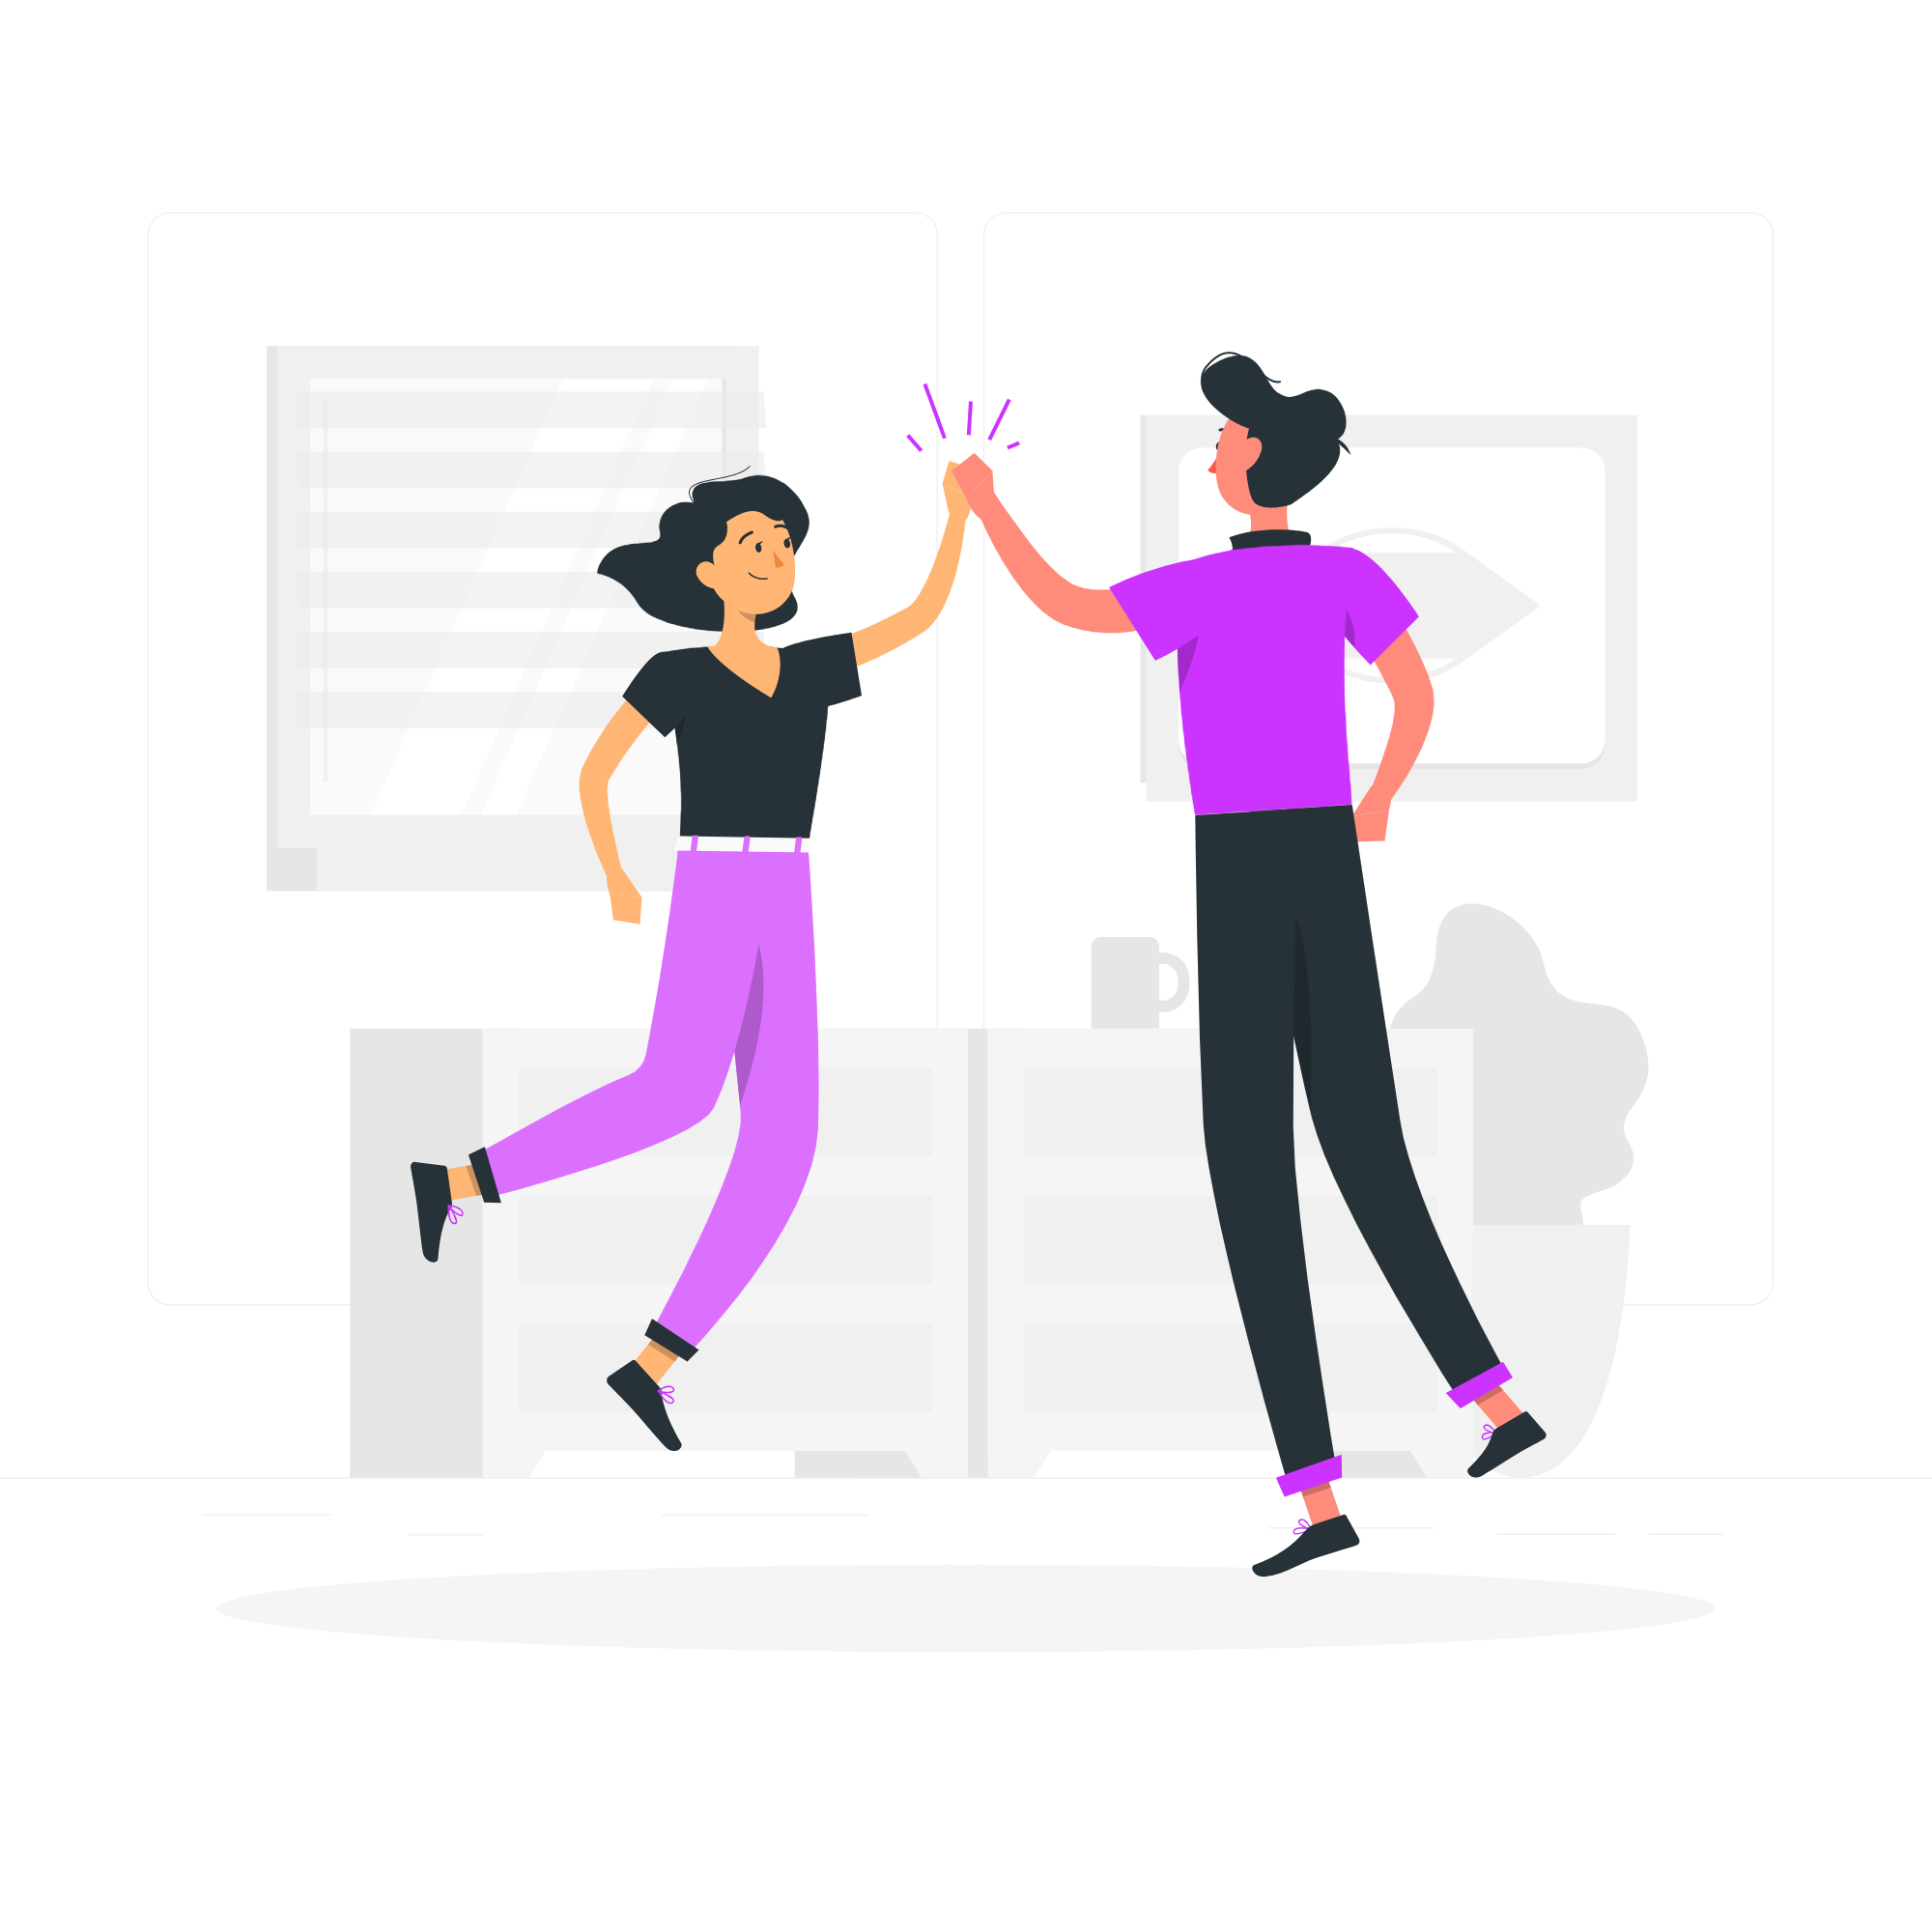 Two people jumping and giving each other high fives (illustration).